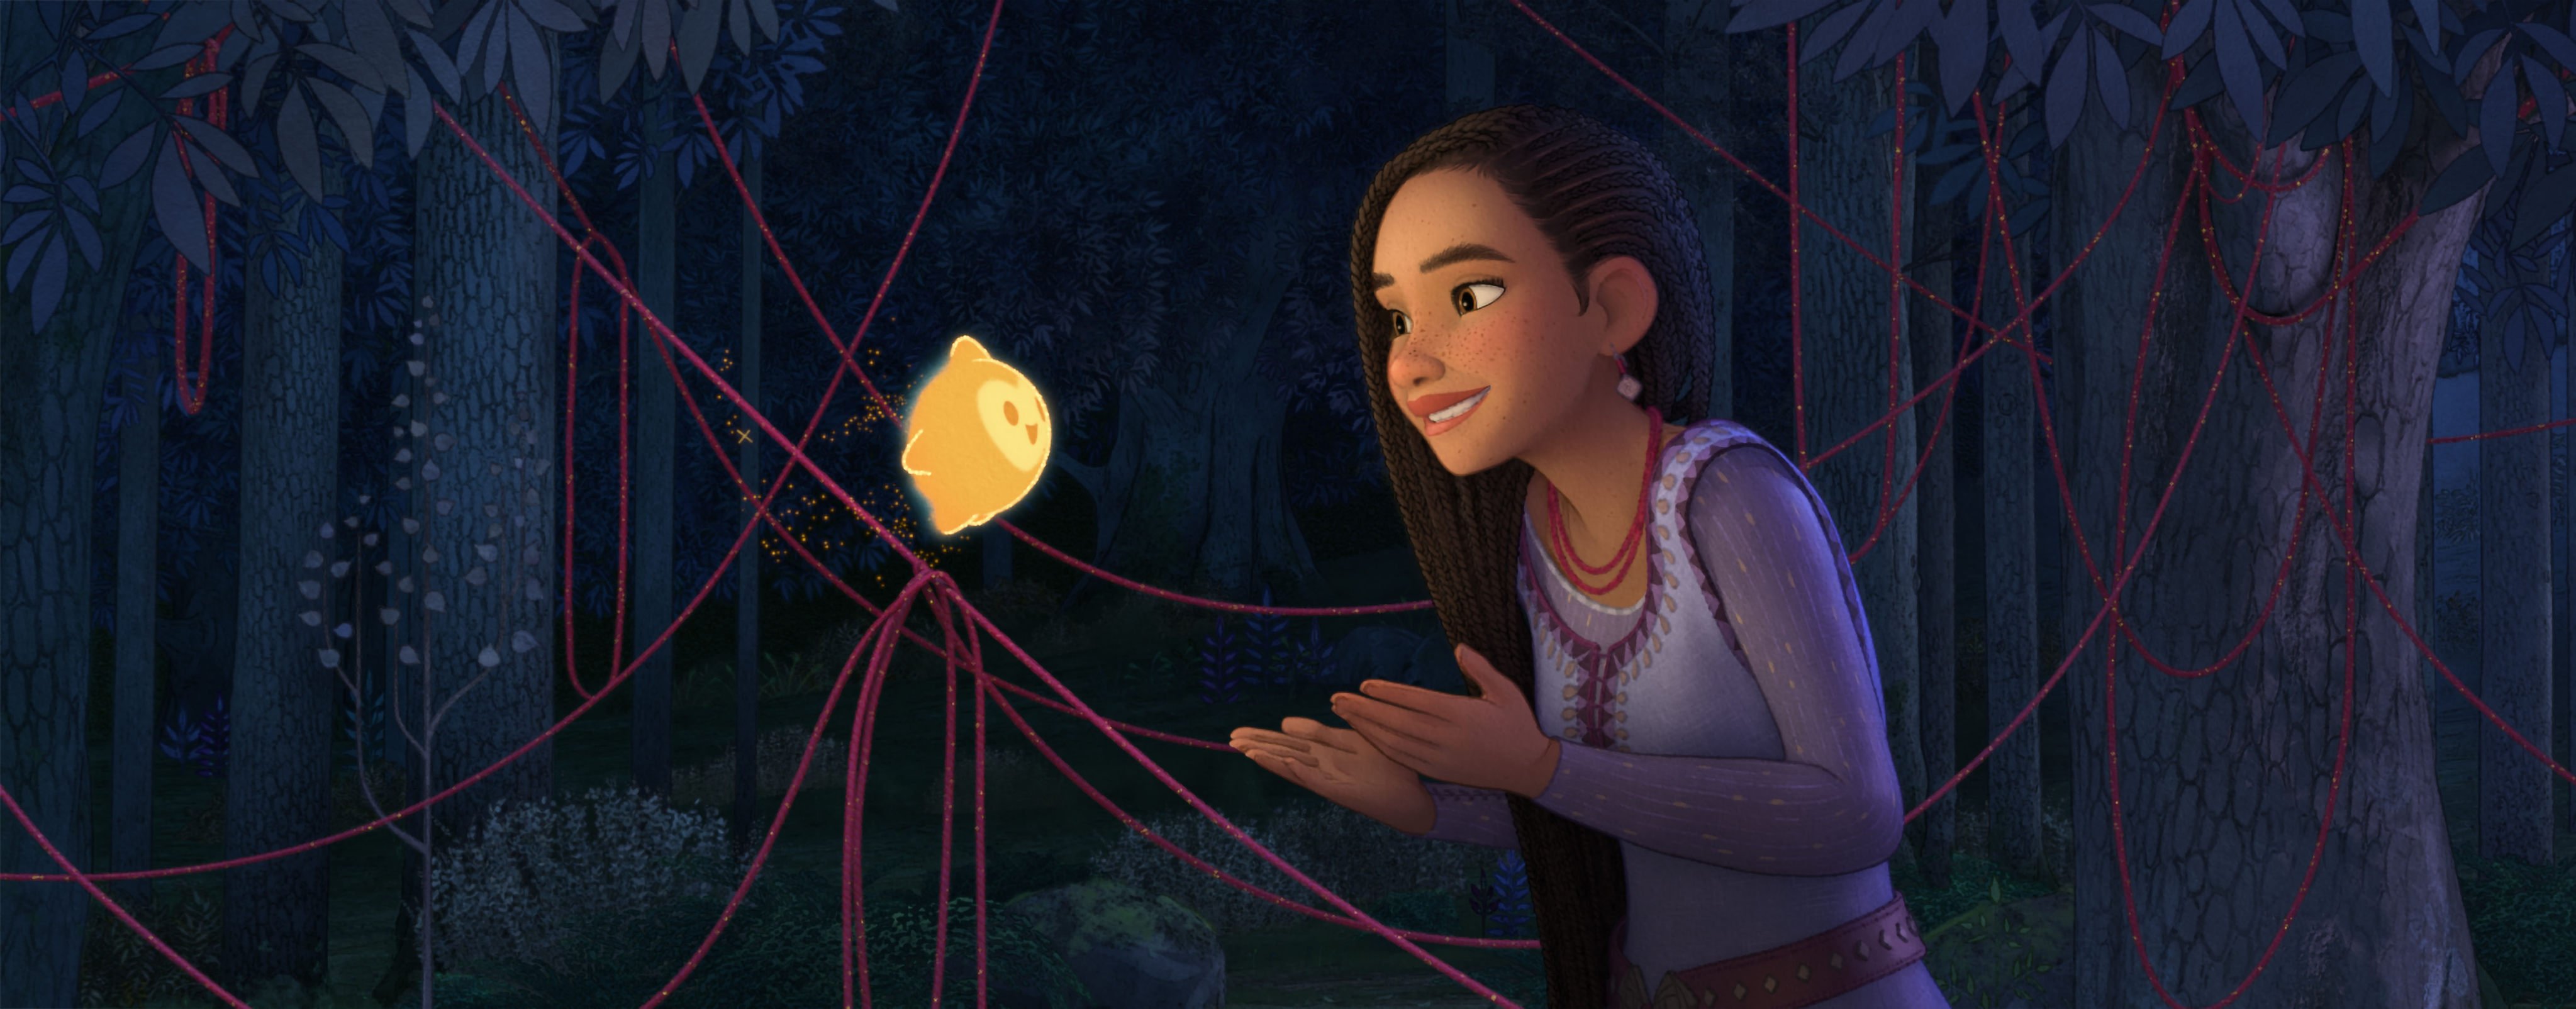 Asha (voiced by Ariana DeBose) in a still from “Wish”. Photo: Disney